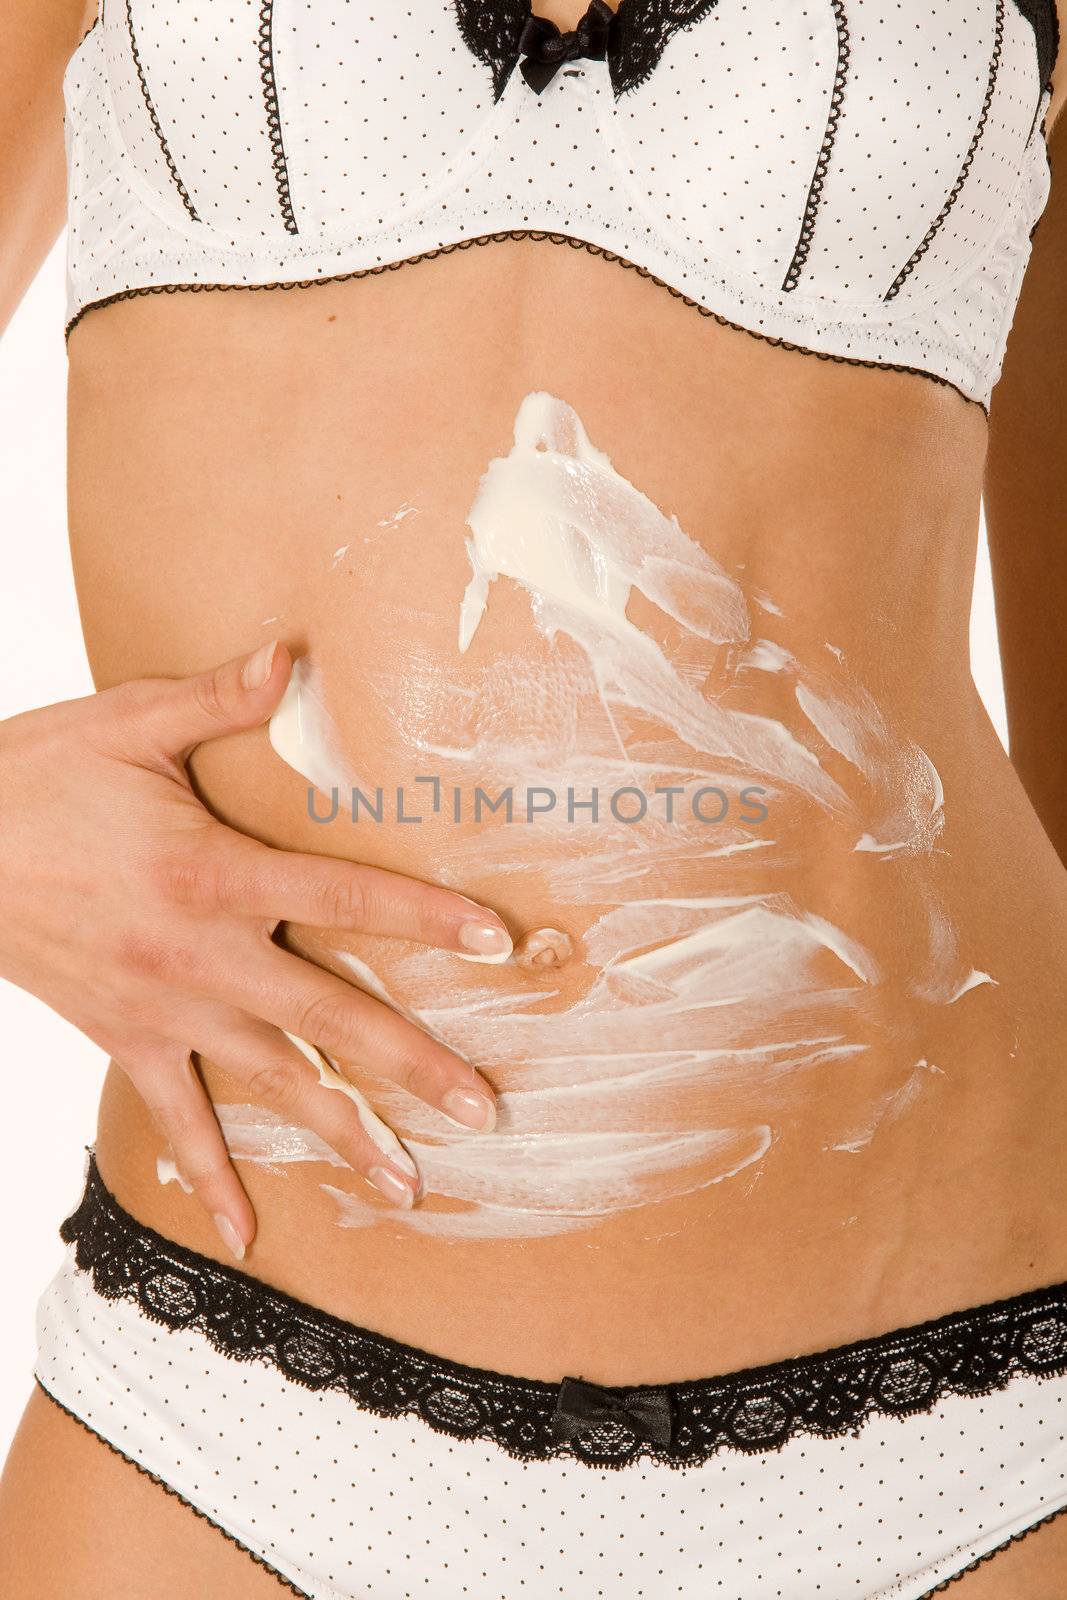 Woman in white lingerie creaming himself in the abdomen